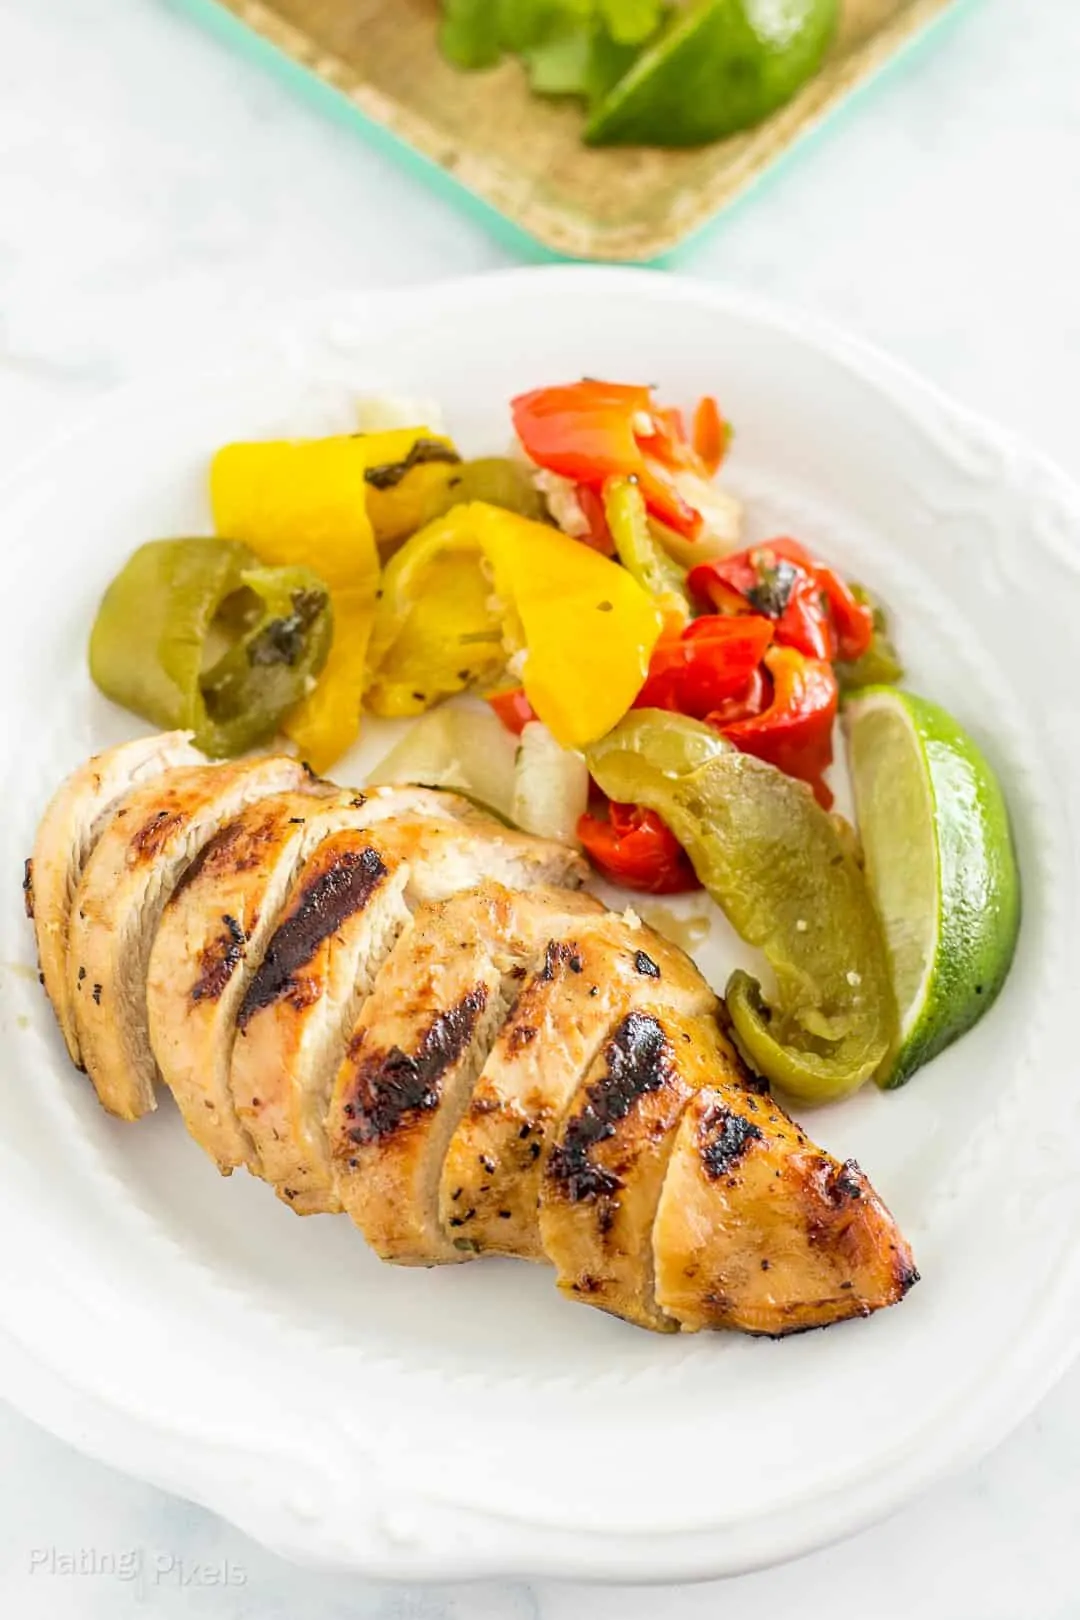 Sliced Grilled Chicken Fajitas on a plate next to the marinated vegetables